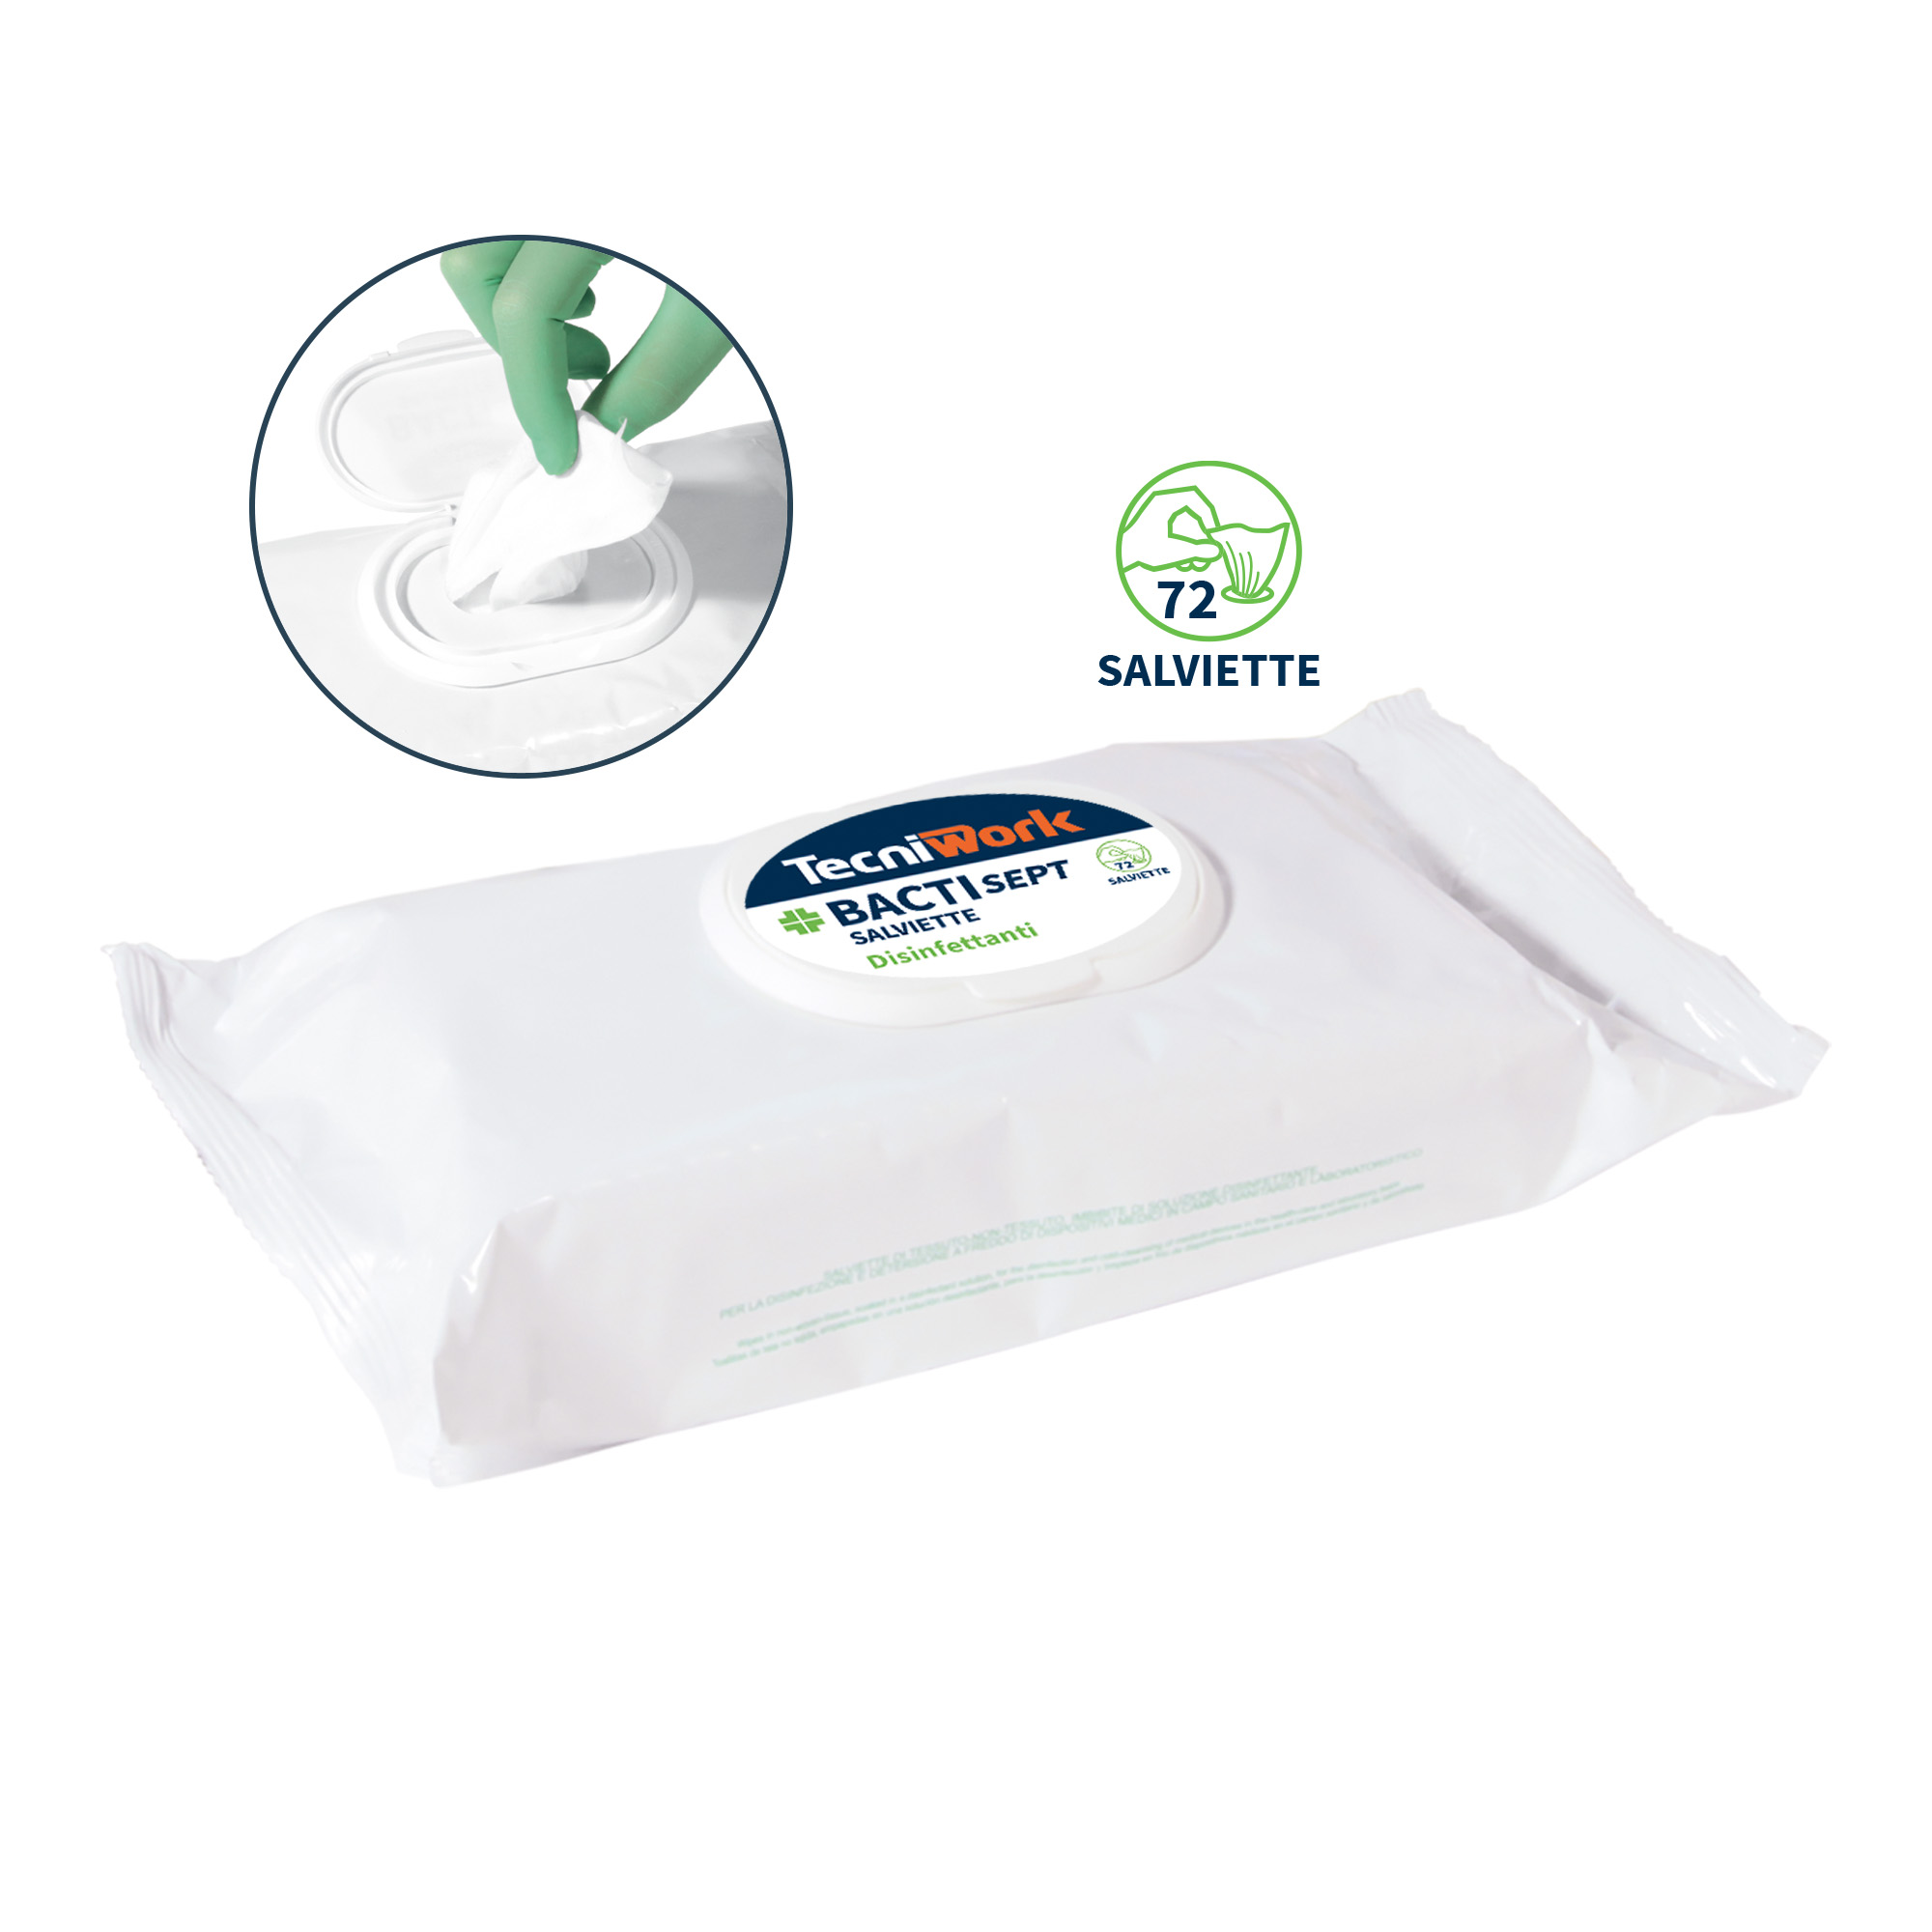 Disinfectant Wipes for Instruments and Surfaces Bactisept 72 pcs